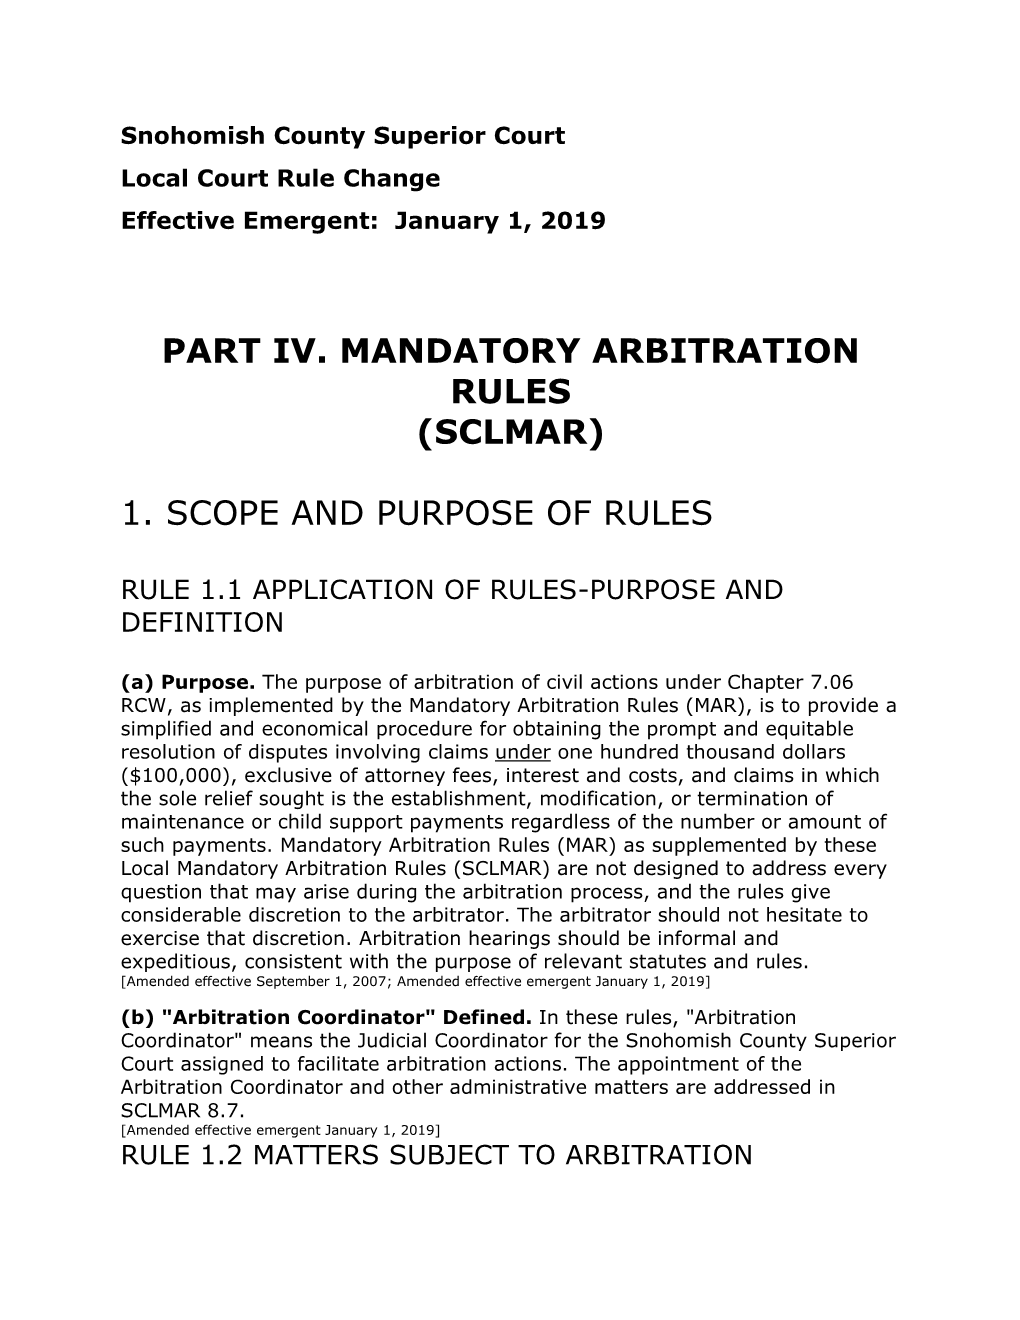 Part Iv. Mandatory Arbitration Rules (Sclmar) 1. Scope and Purpose Of